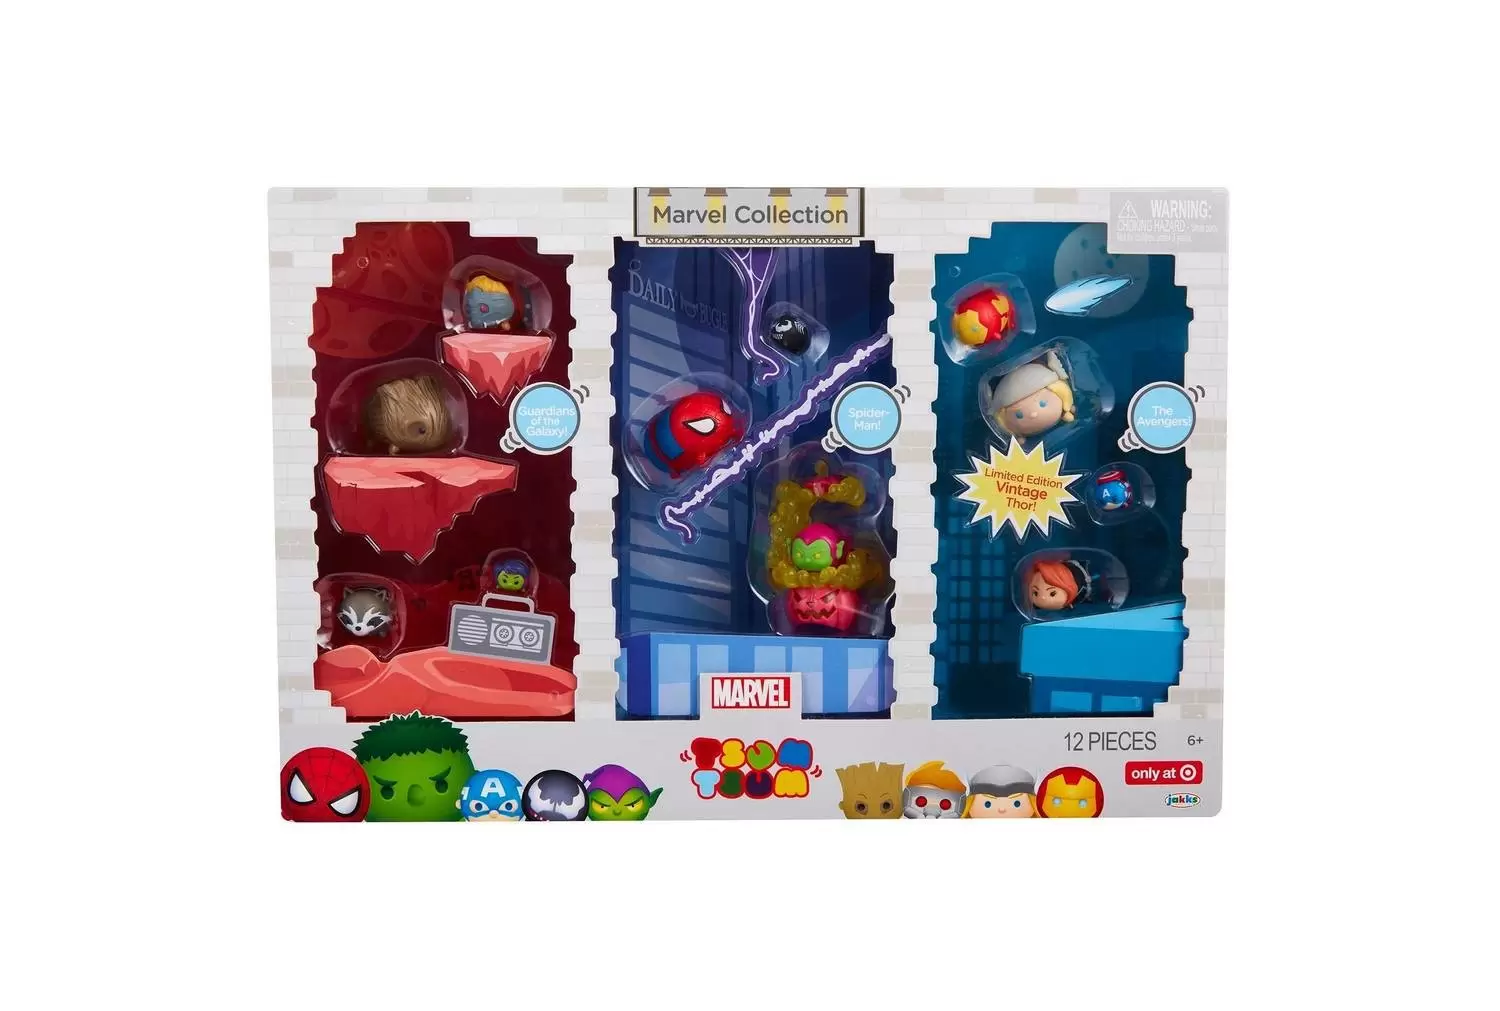 Tsum Tsum Jakks Pacific Exclusive And Sets - Target Marvel Collection